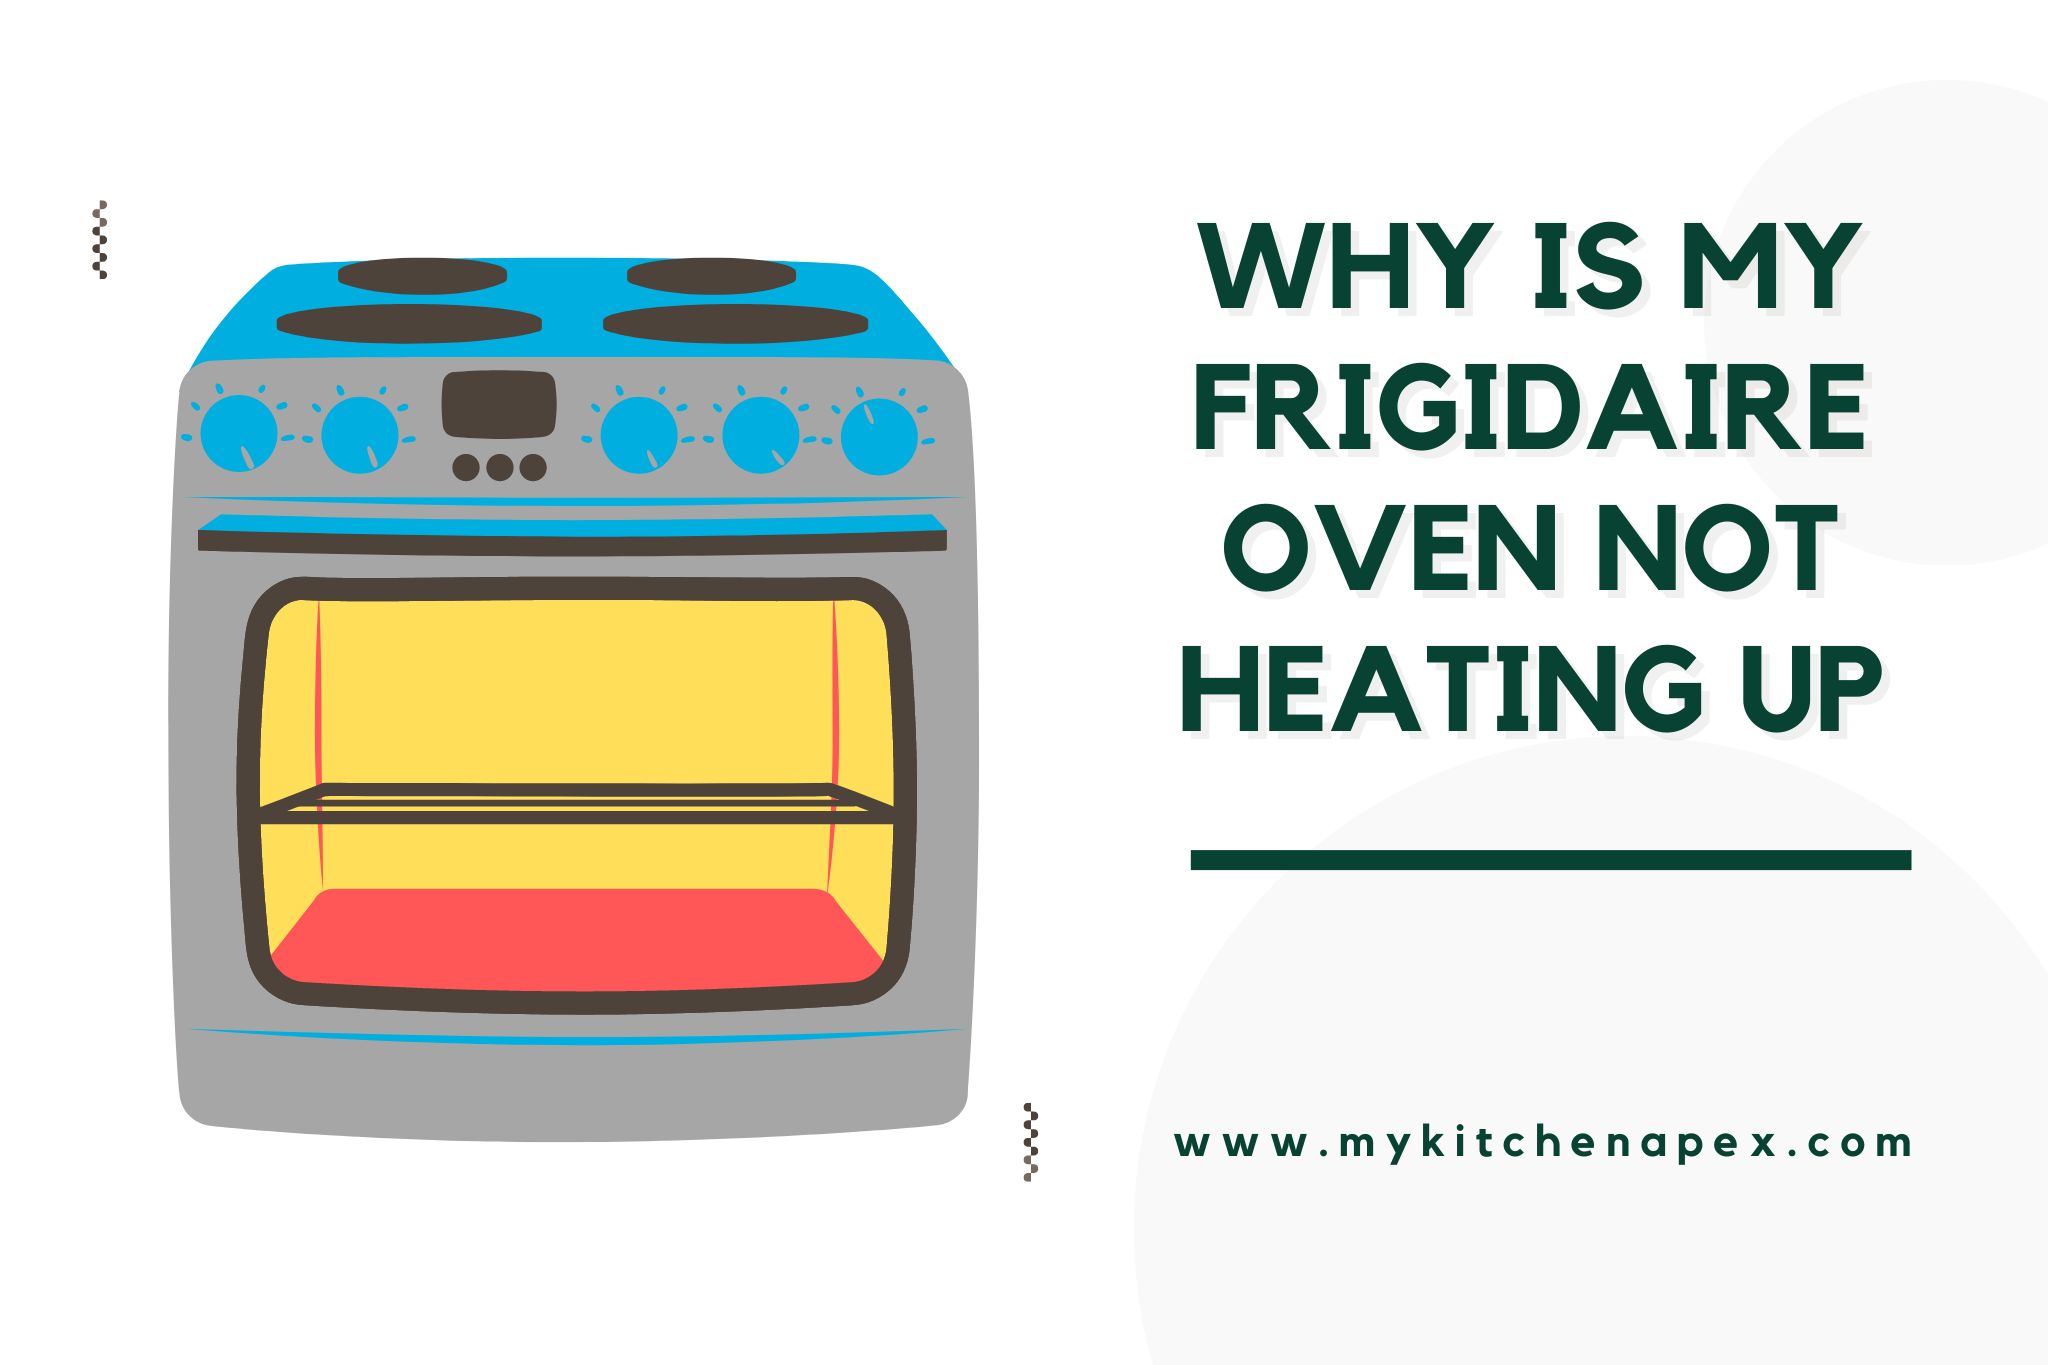 why is my frigidaire oven not heating up